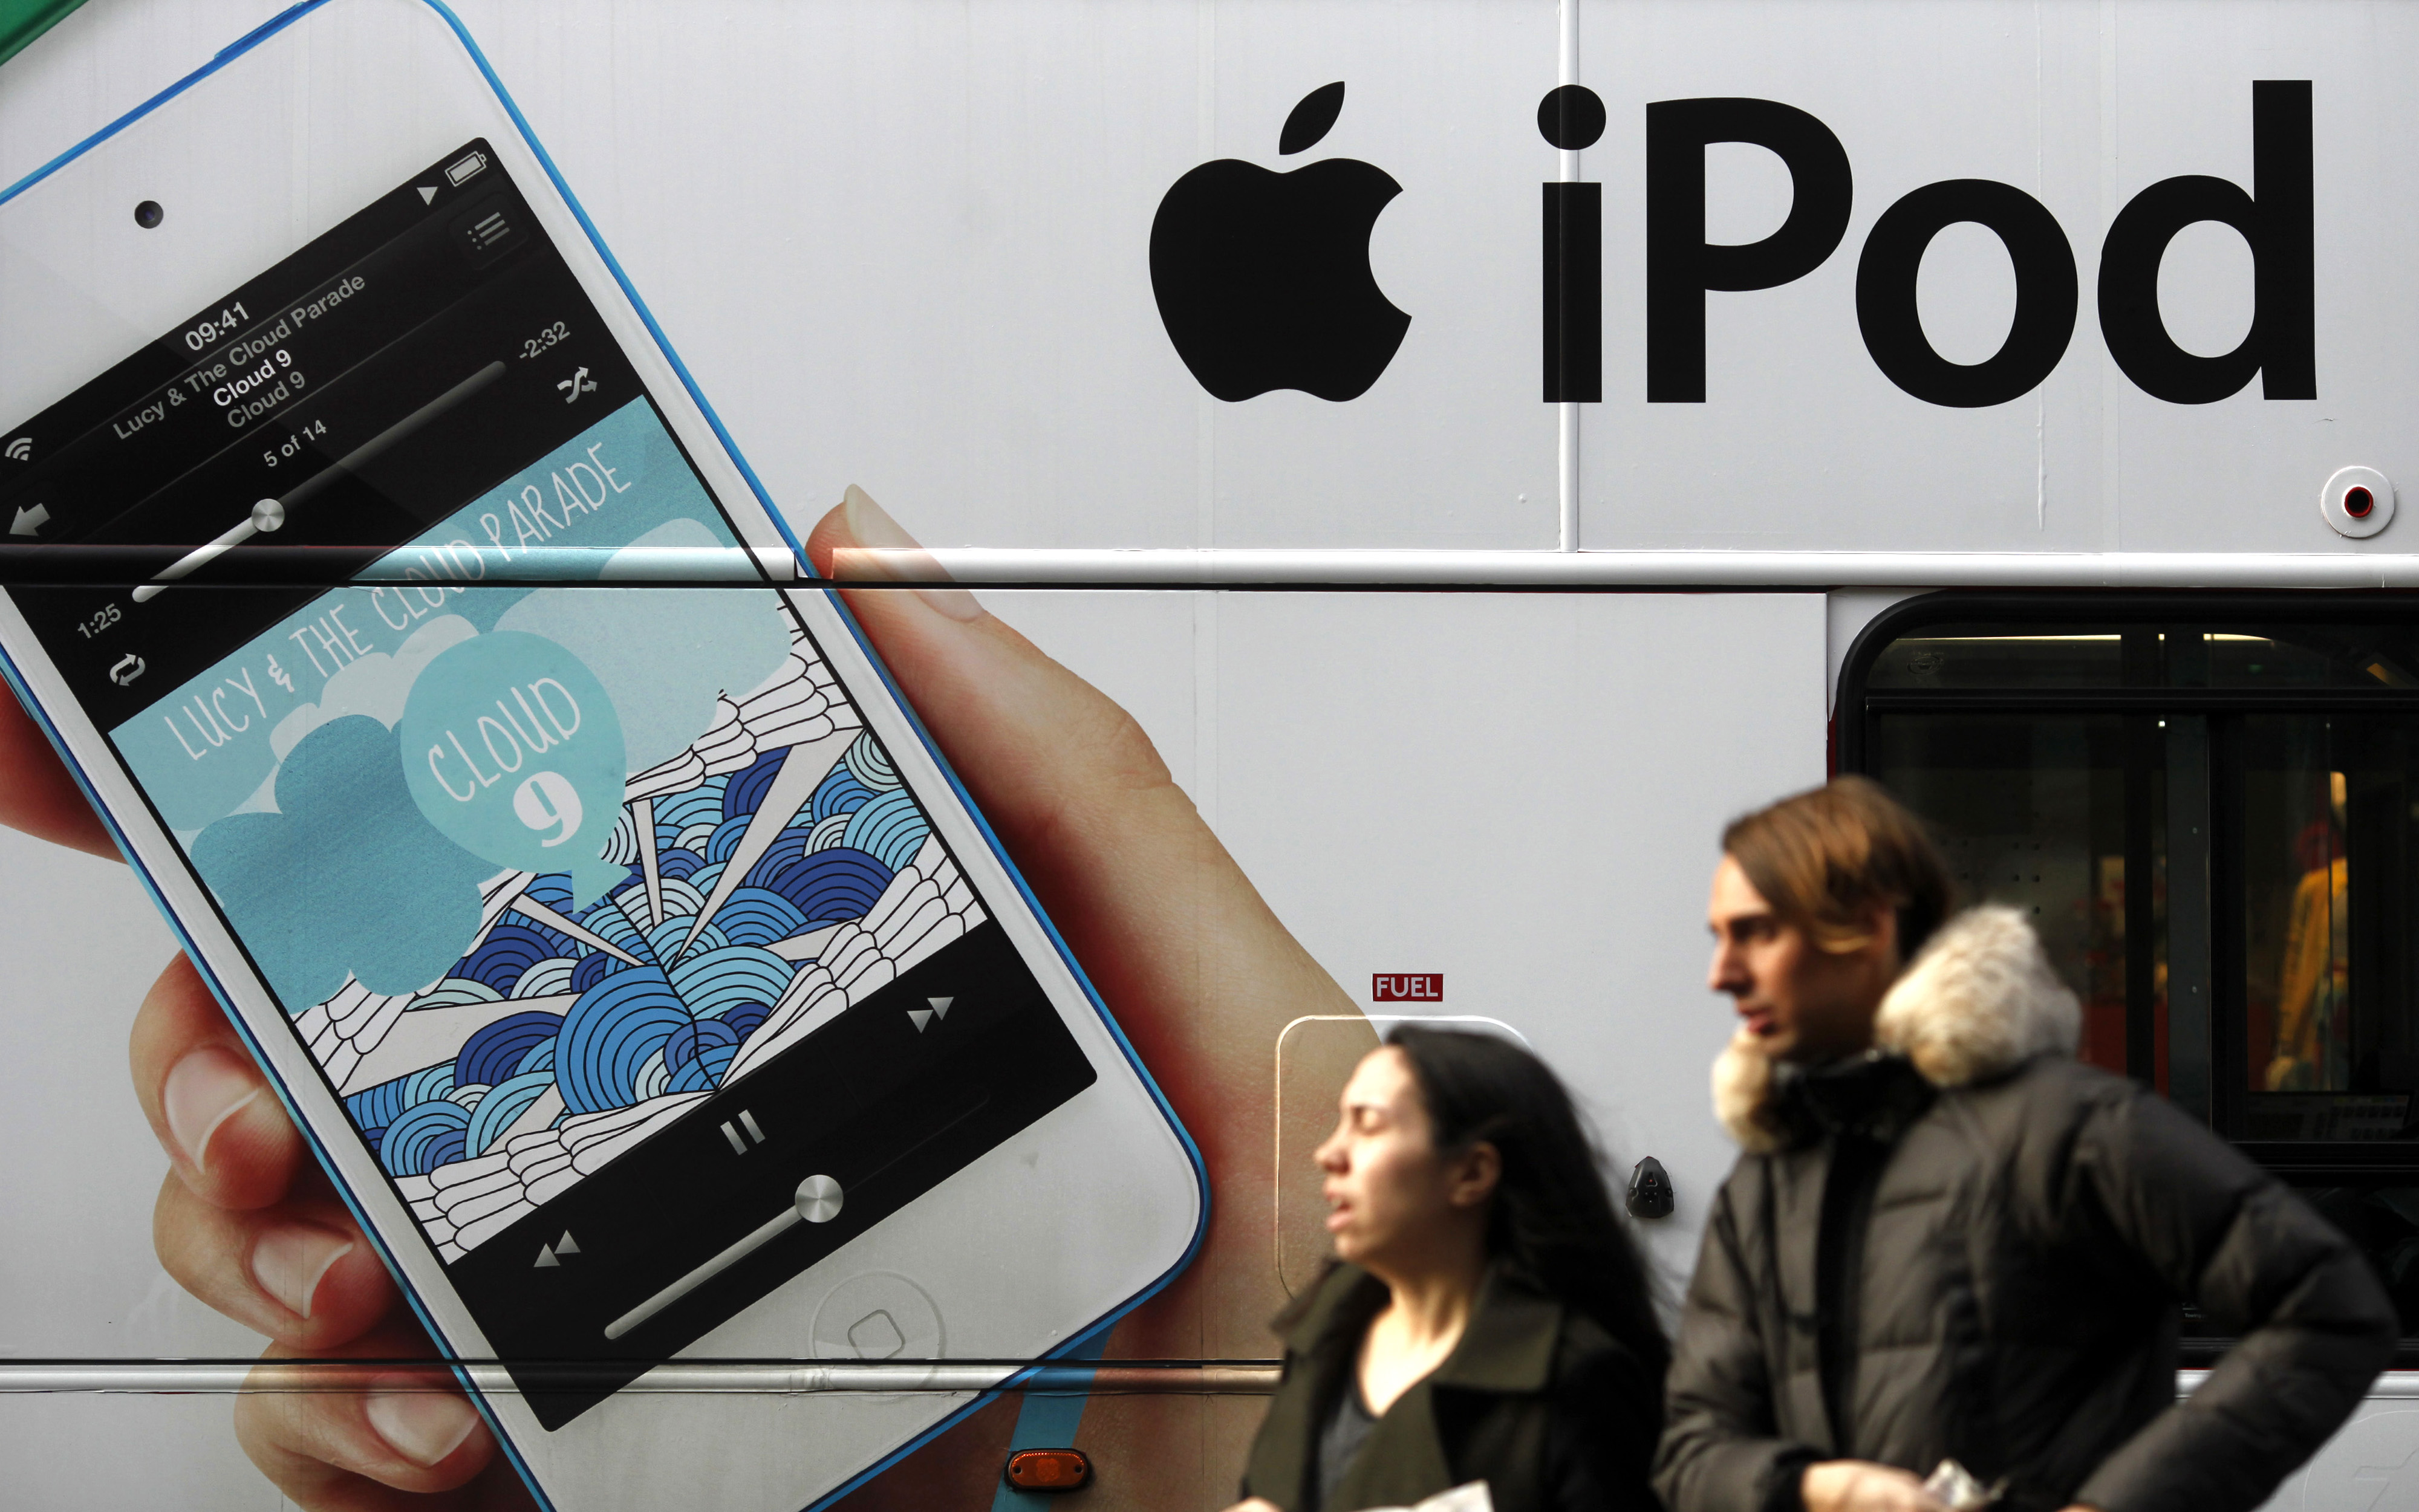 An advertisement for Apple's iPod is displayed on the side of a London bus, Dec. 21, 2012. 